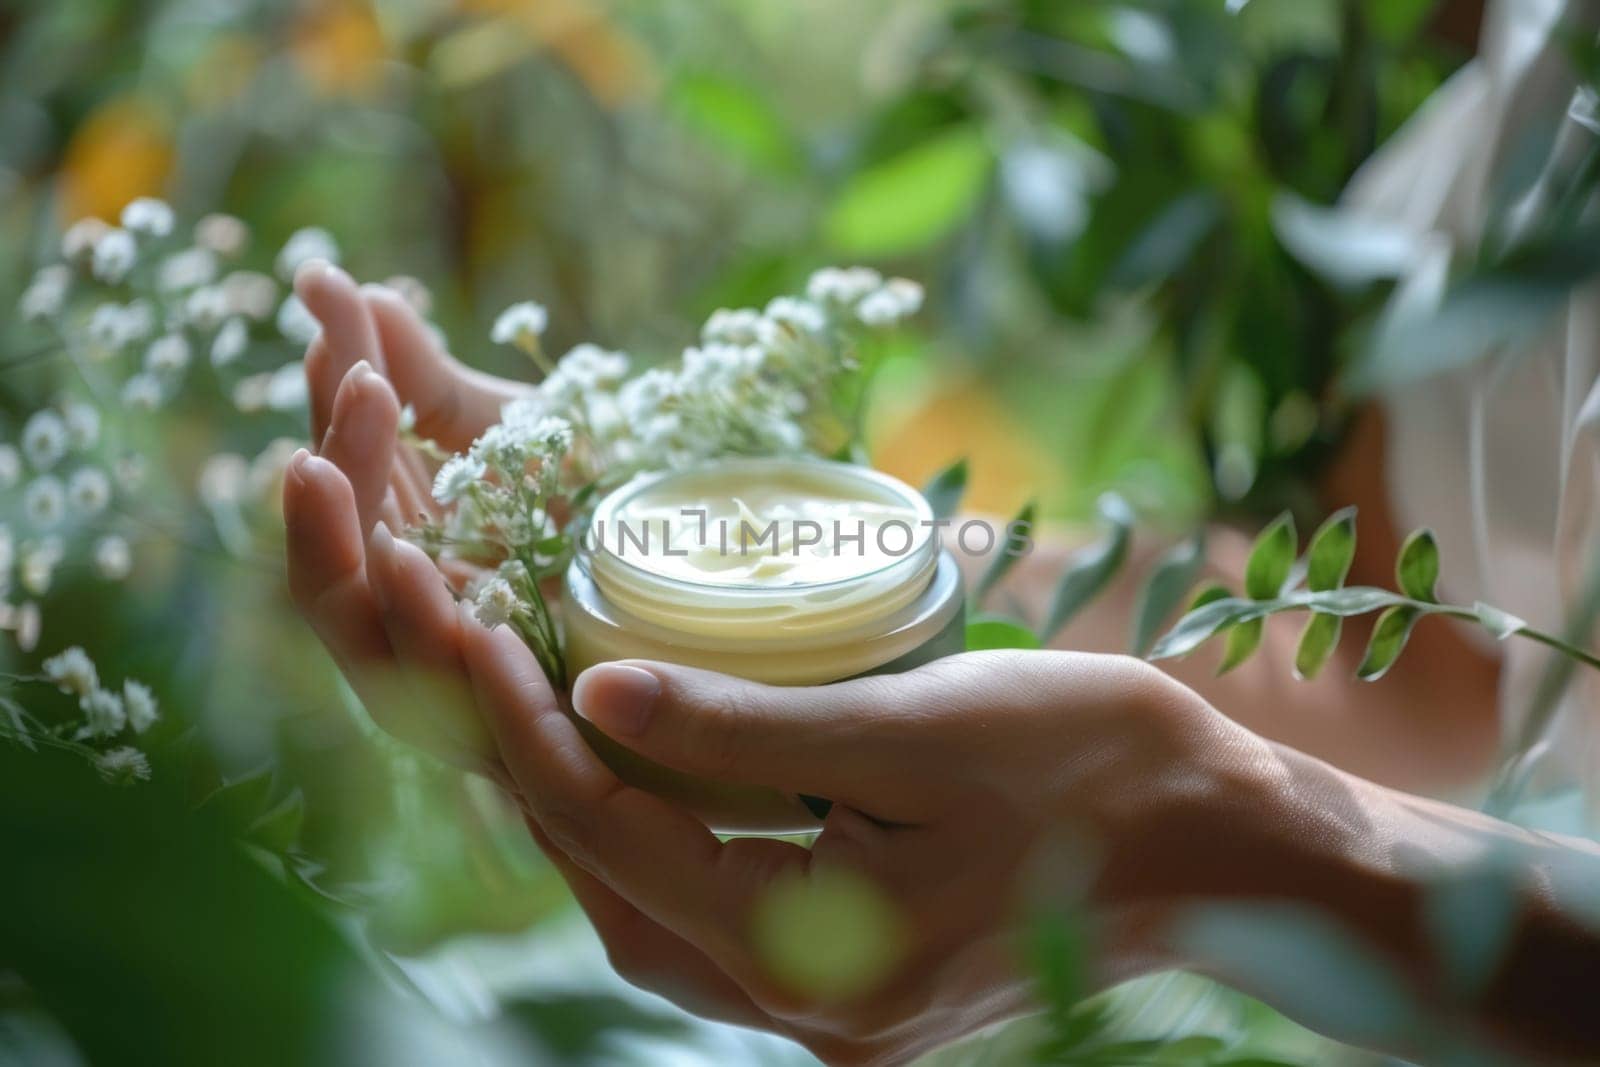 Tender hands cradle a jar of herbal cream among vibrant greenery, evoking themes of natural healing and alternative therapies